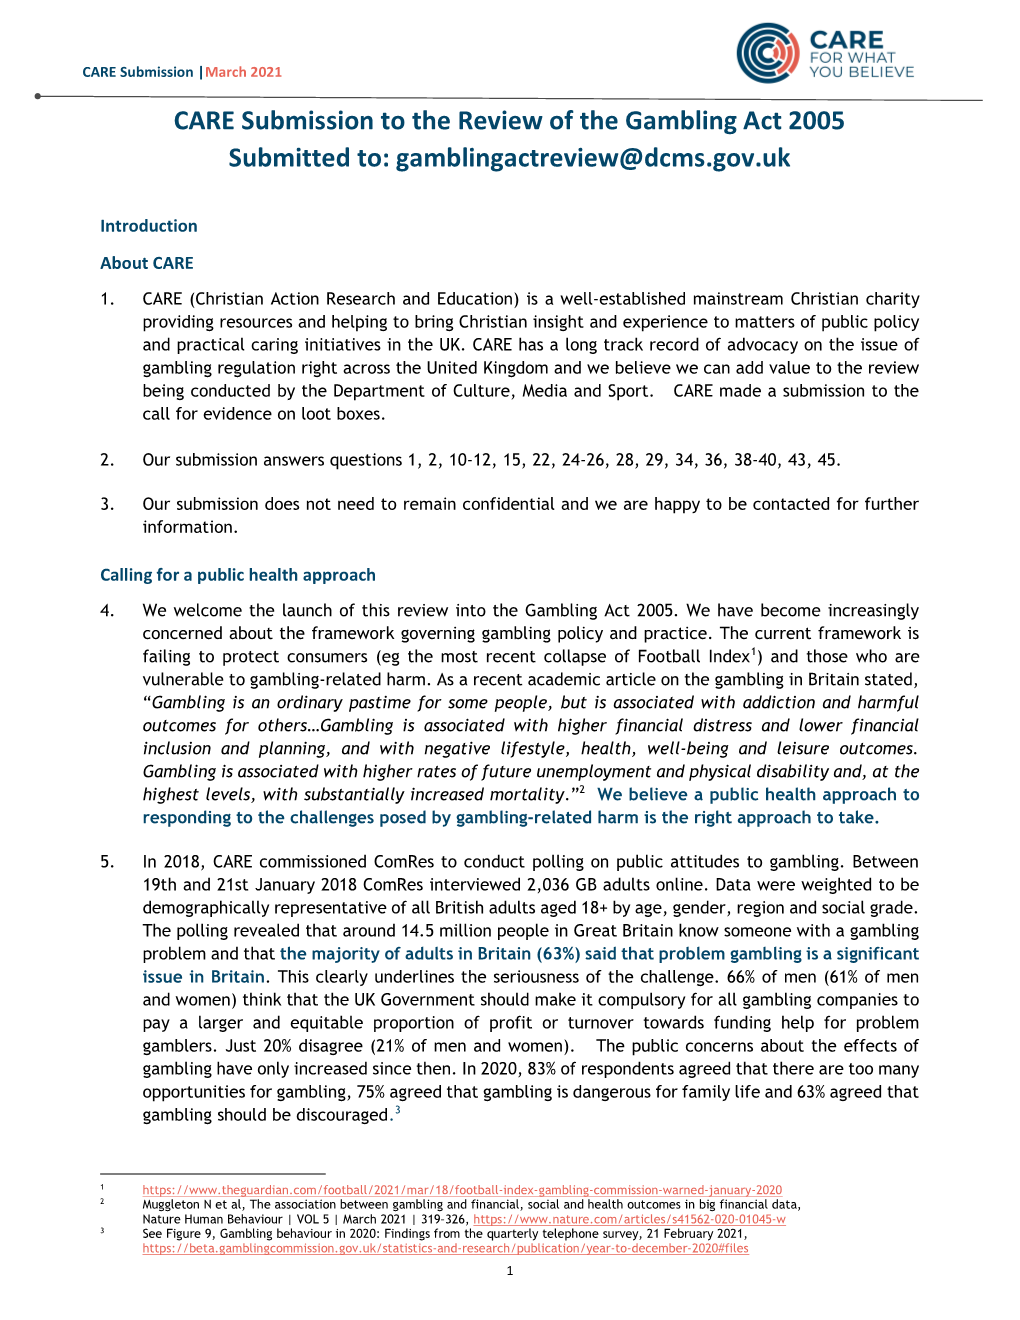 CARE Submission to the Review of the Gambling Act 2005 Submitted To: Gamblingactreview@Dcms.Gov.Uk